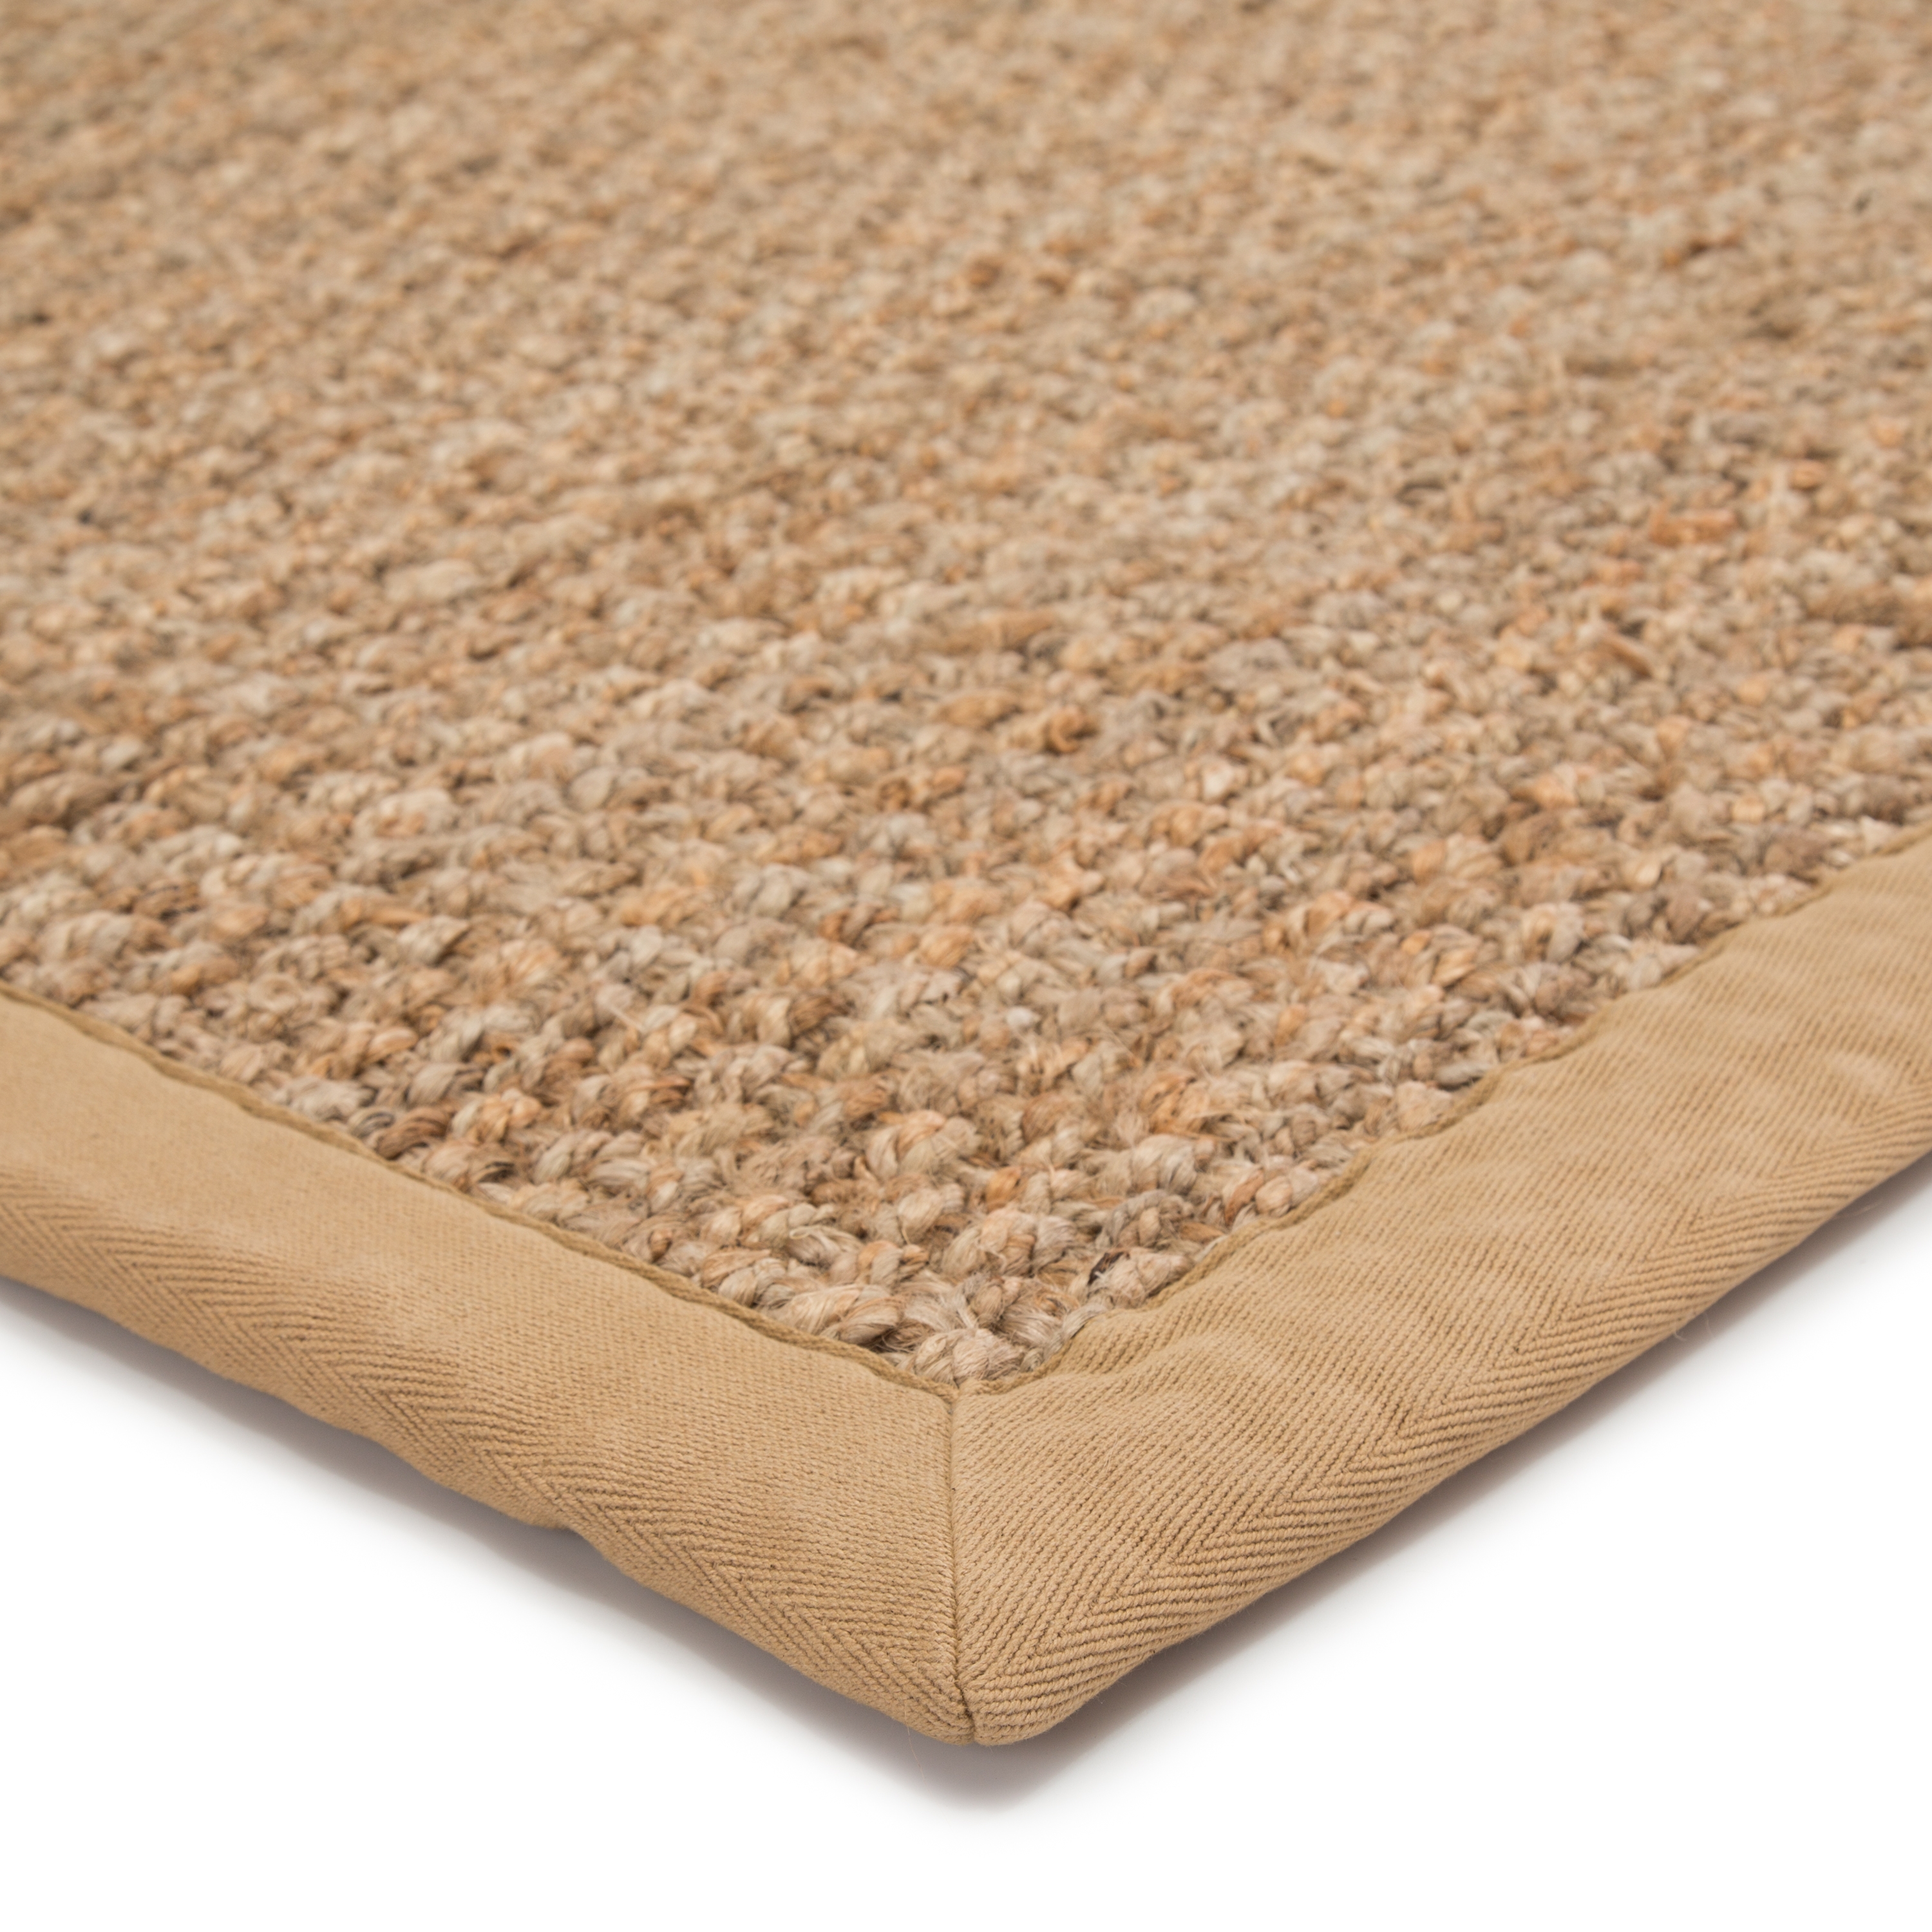 Adesina Natural Solid Beige Area Rug (9' X 12') - Image 1